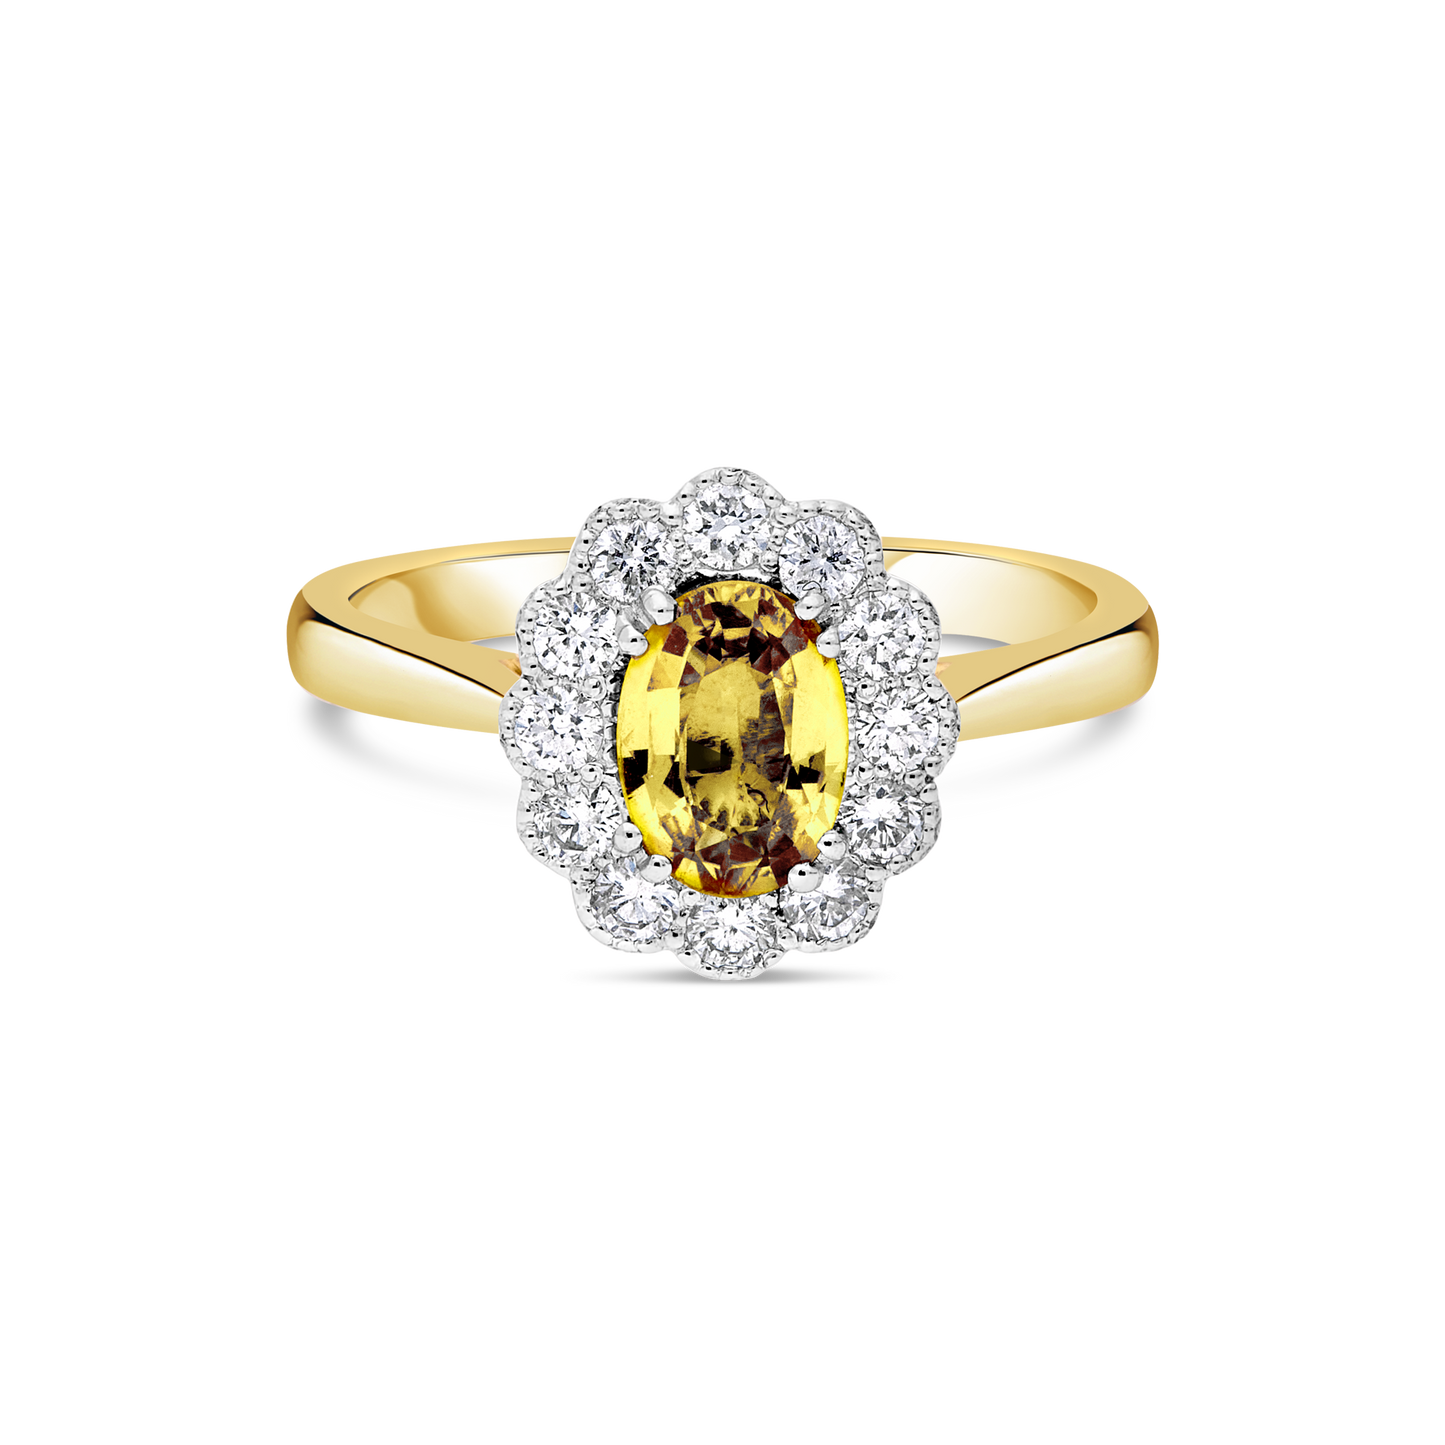 The "Kate" Flower Yellow Sapphire and Diamond Ring